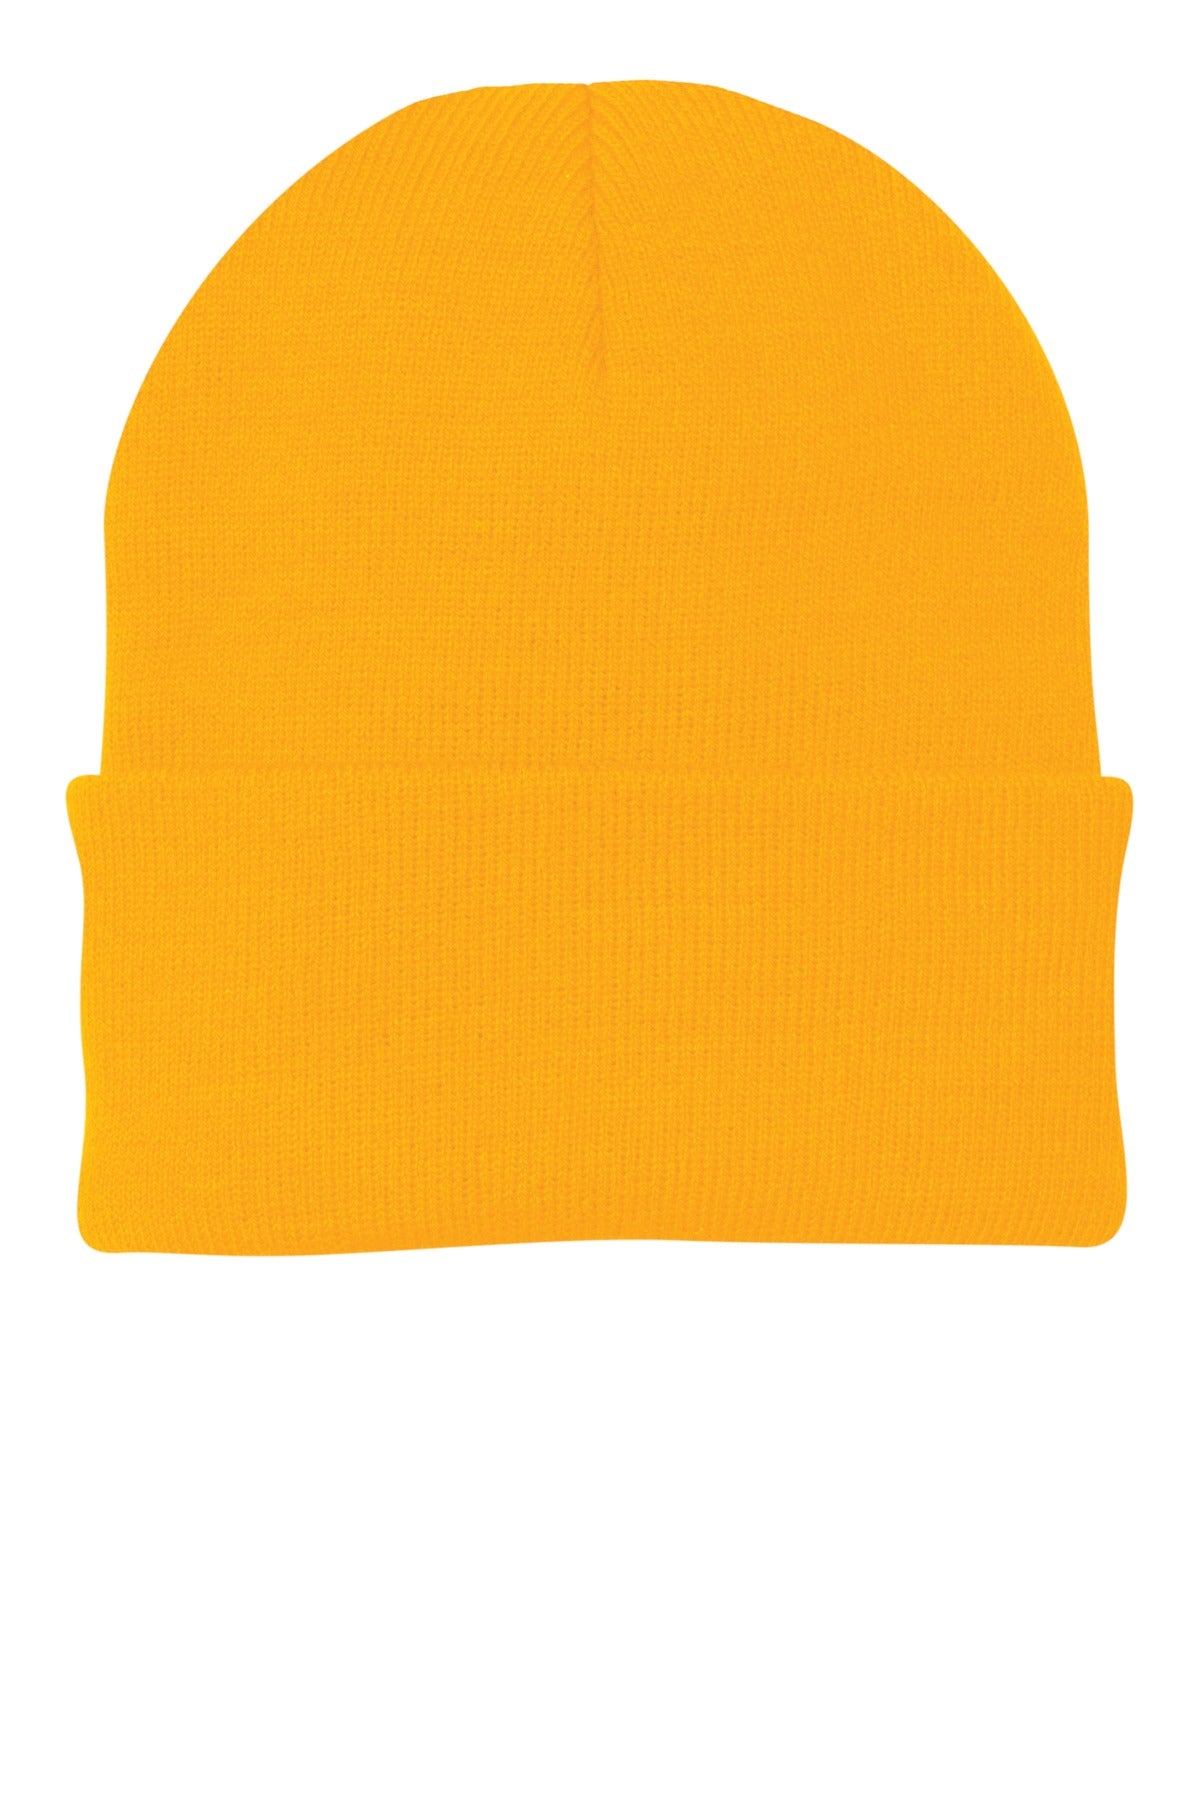 Port & Company Knit Cap. CP90 - Athletic Gold